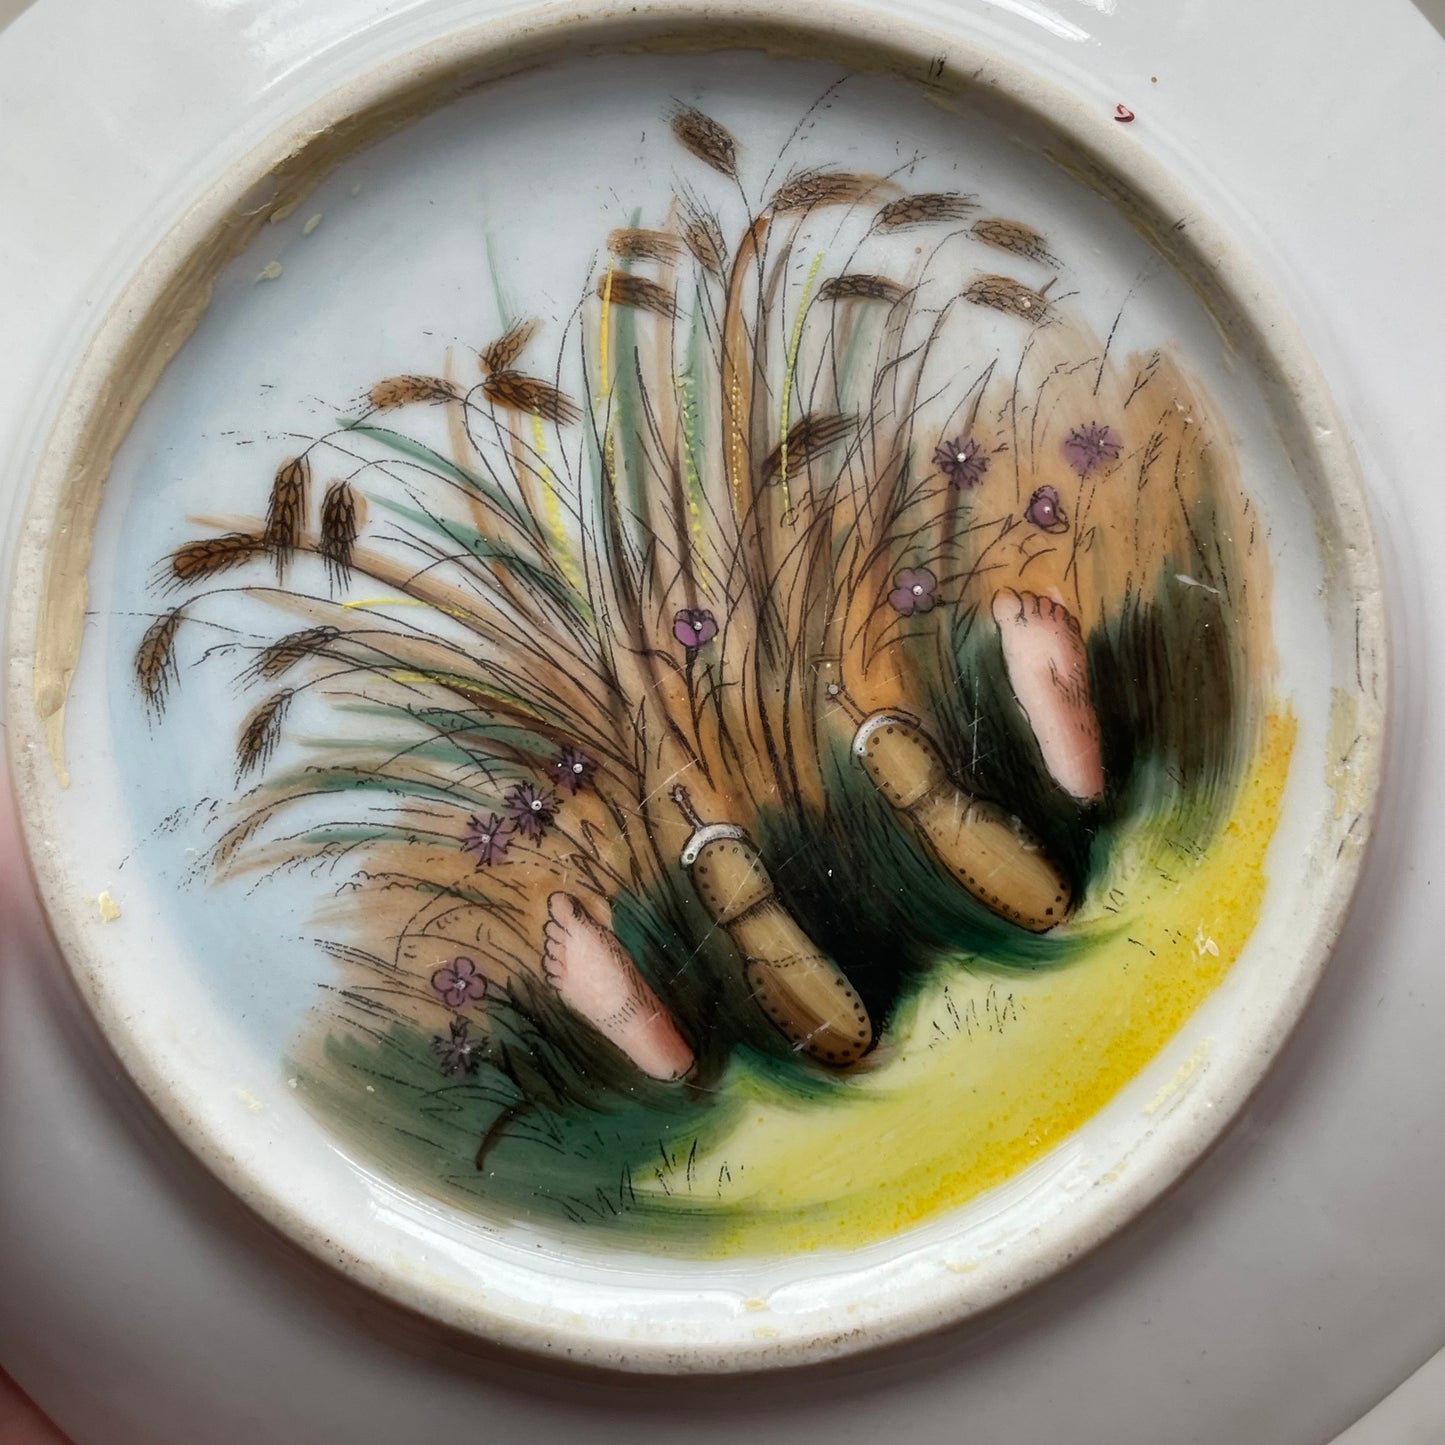 Coming through the Rye | Antique Erotic Novelty Dish